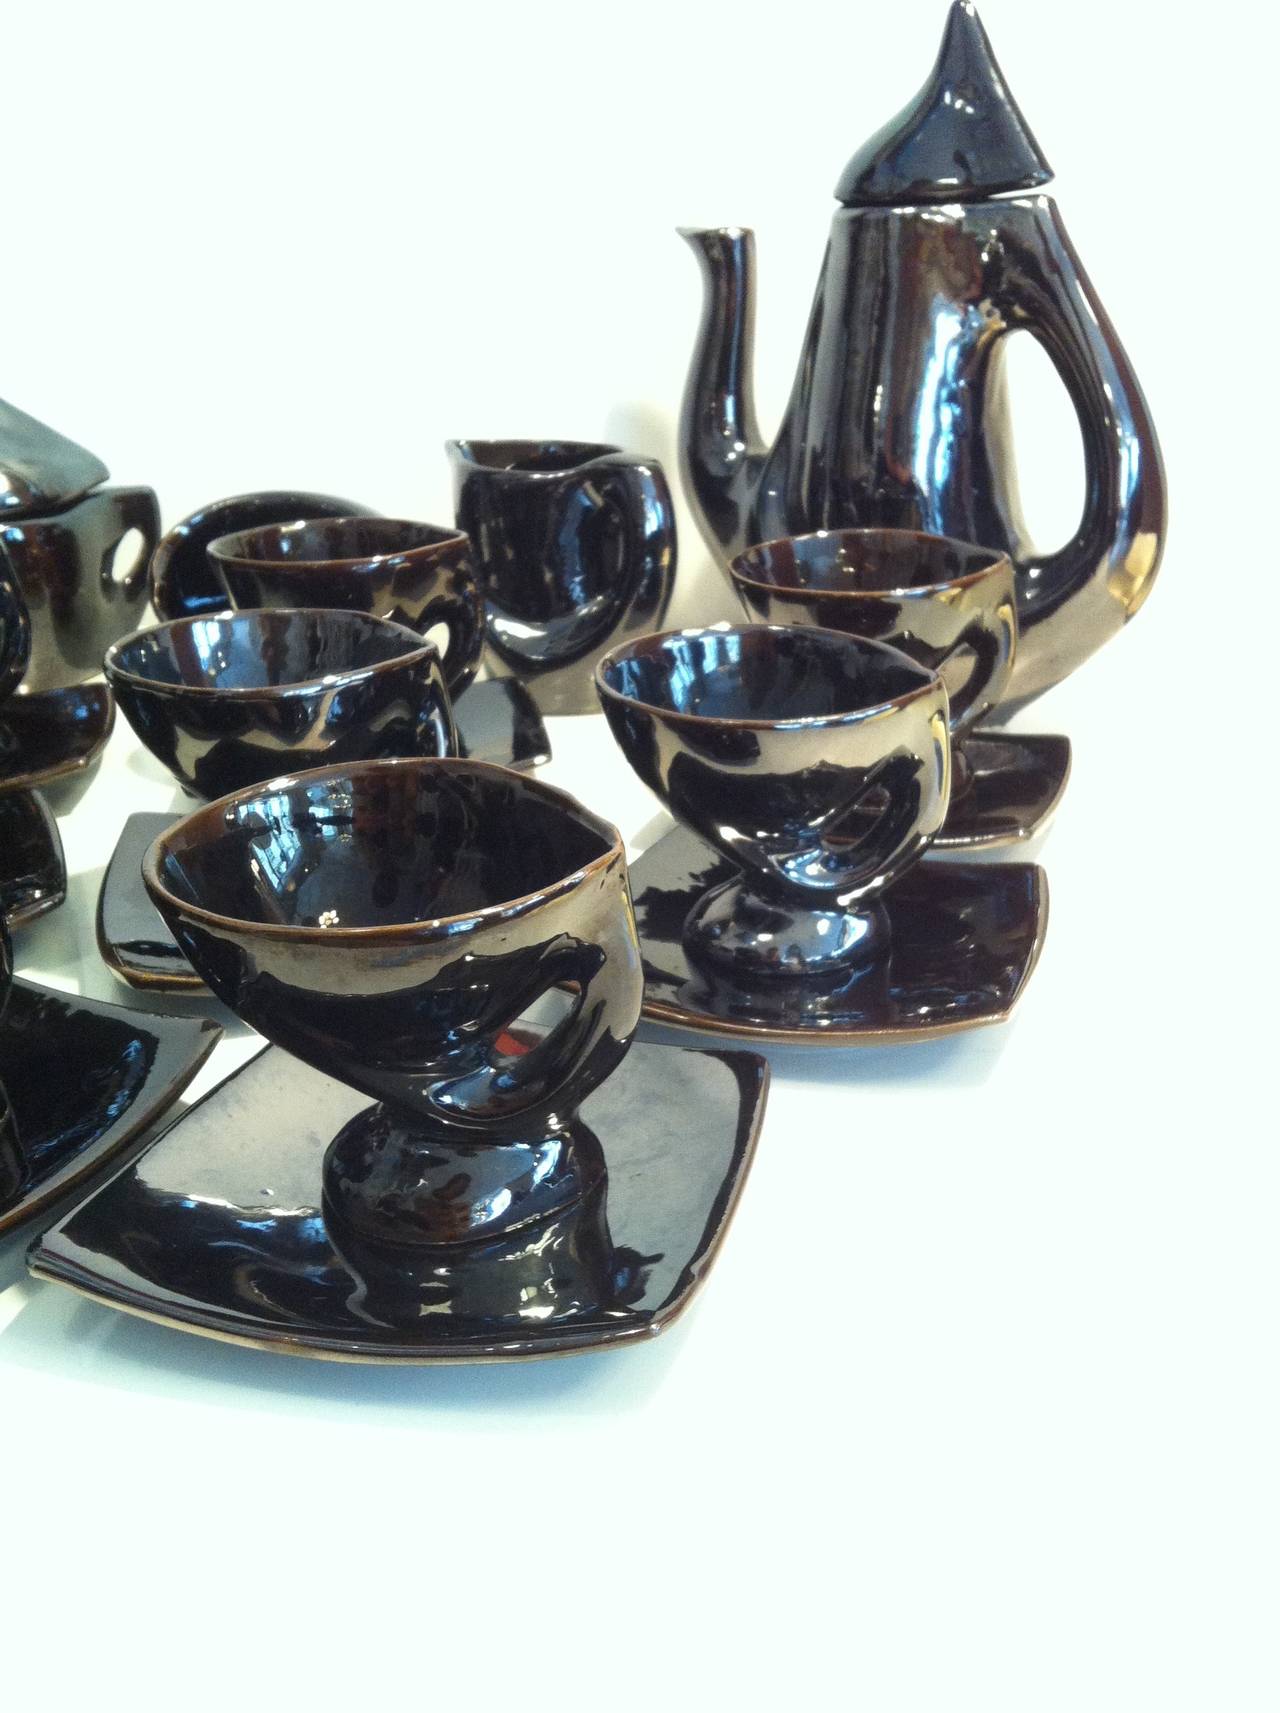 Beautiful and rare 1960s iridescent black tea or coffee service, a Vallauris complete 12 pieces signed set:
- 8 cups with plates (Cup: H. 8 cm x Diameter 9 cm - Plate: 12,5 cm x 11,5 cm)
- 1 Coffee pot with its lid (H. 26 cm x L. 21 cm x P.